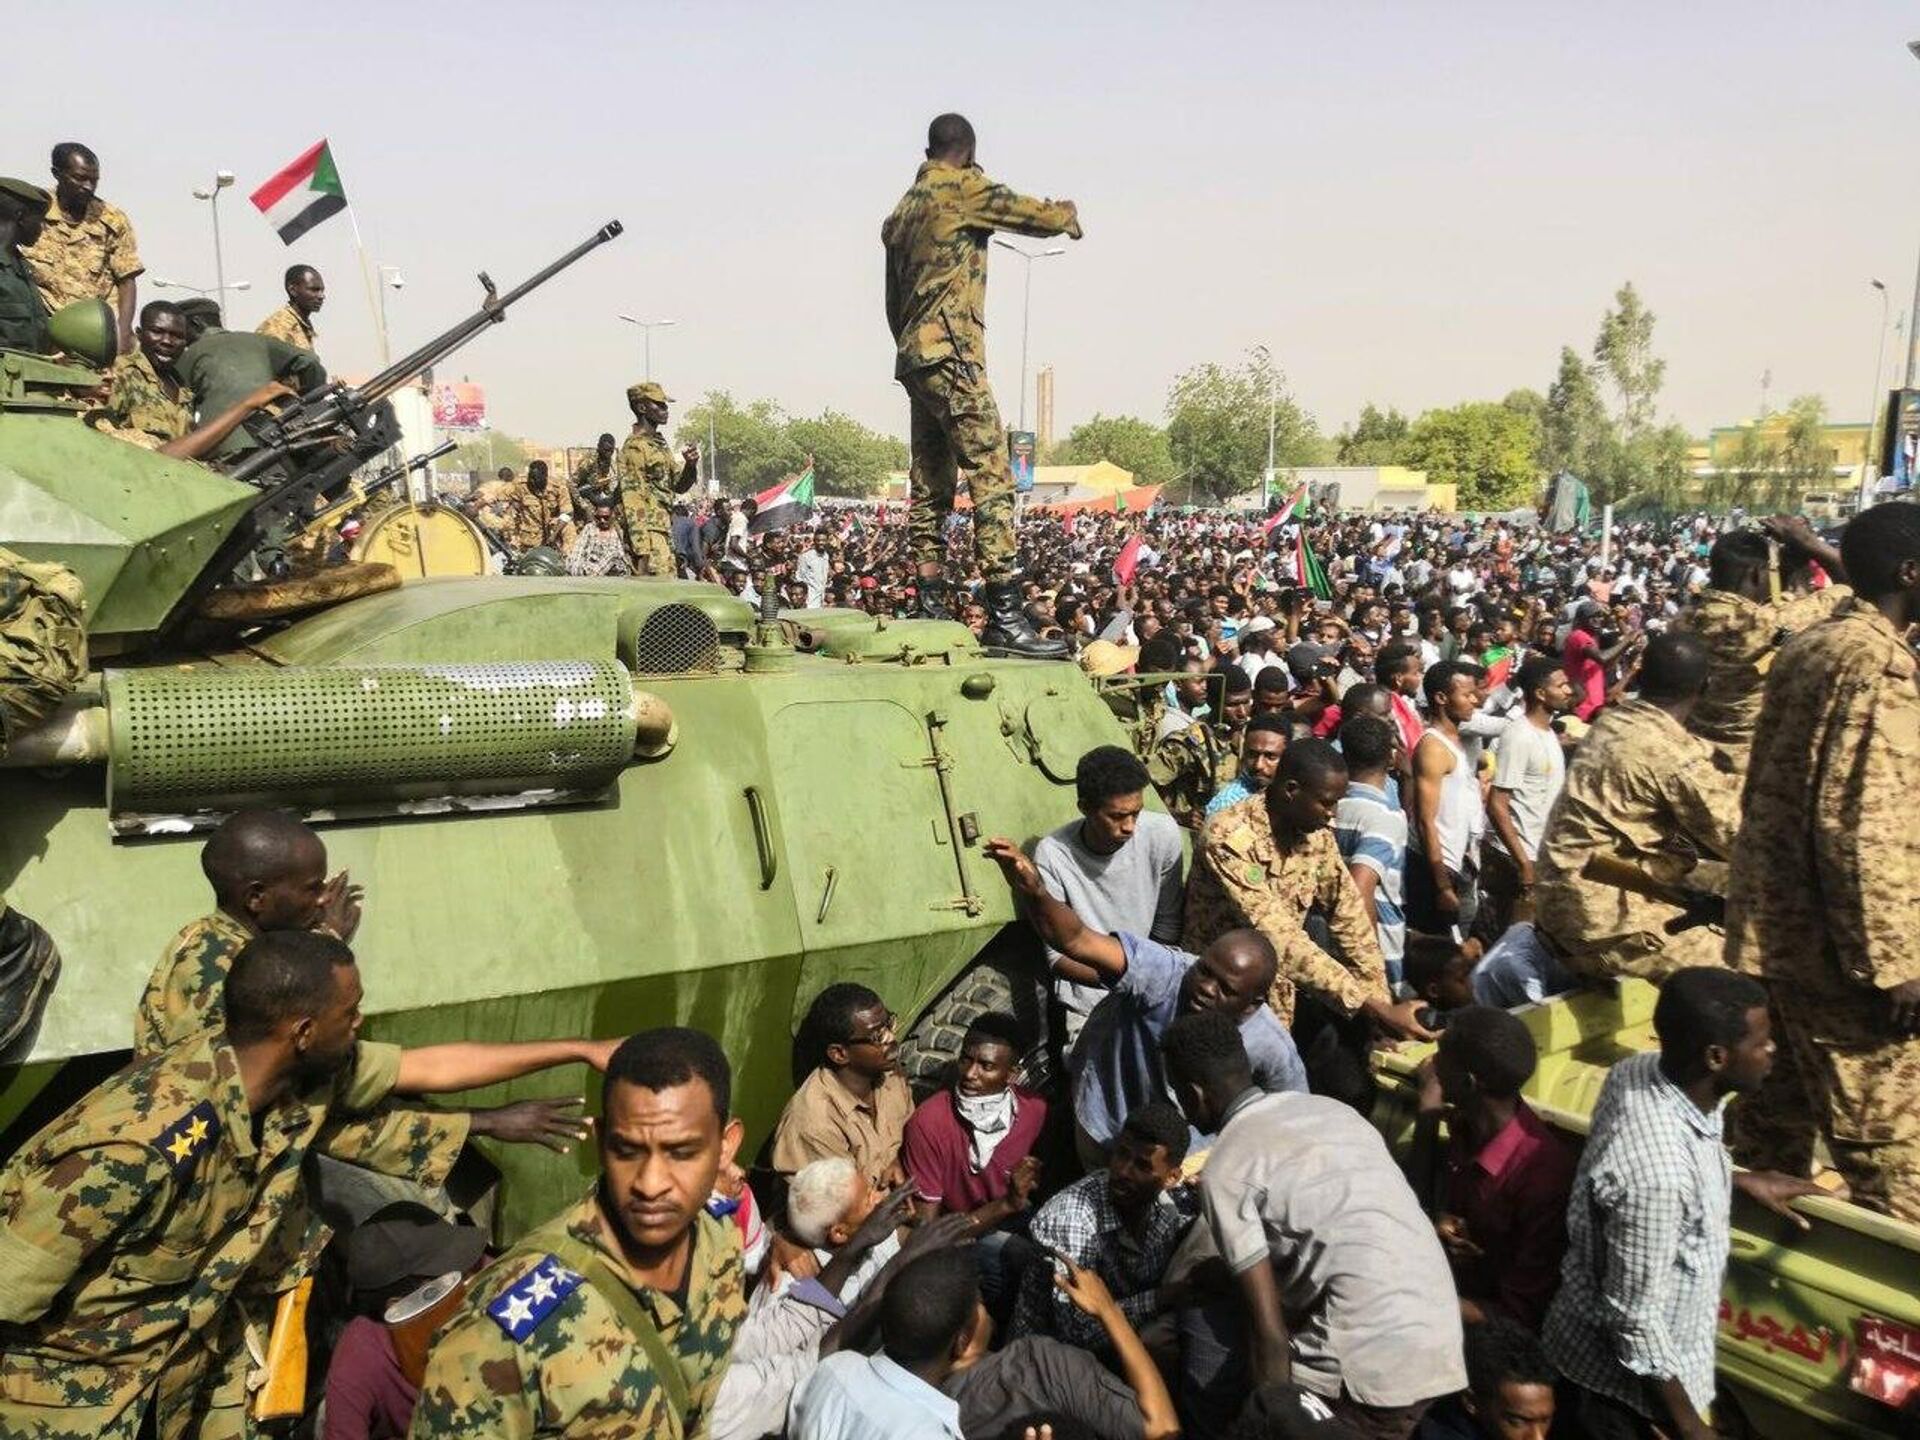 Sudanese soldeirs stand guard around armoured military vehicles as demonstrators continue their protest against the regime near the army headquarters in the Sudanese capital Khartoum (File) - Sputnik International, 1920, 21.09.2021